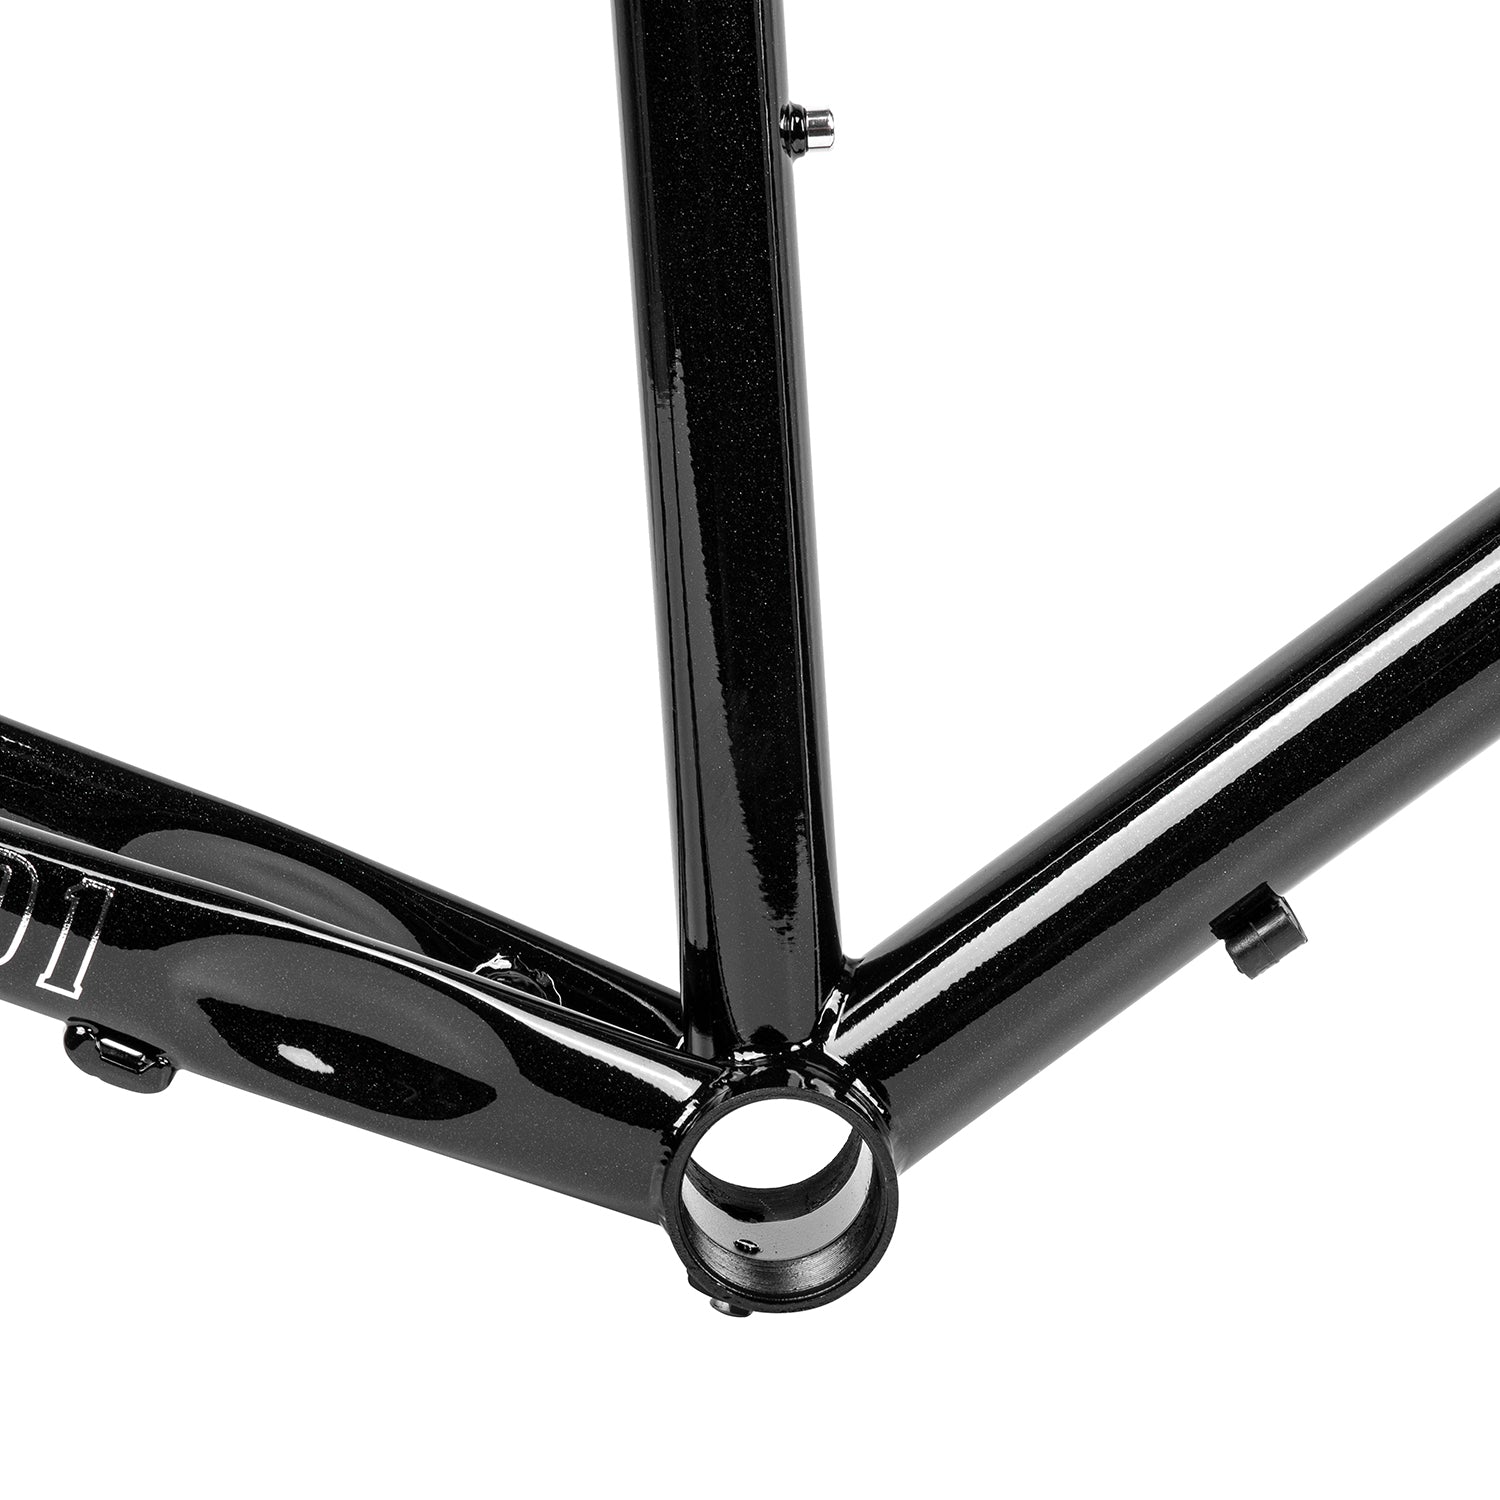 Seaboard CX01 Bicycle Frames 885.00 Atelier Olympia